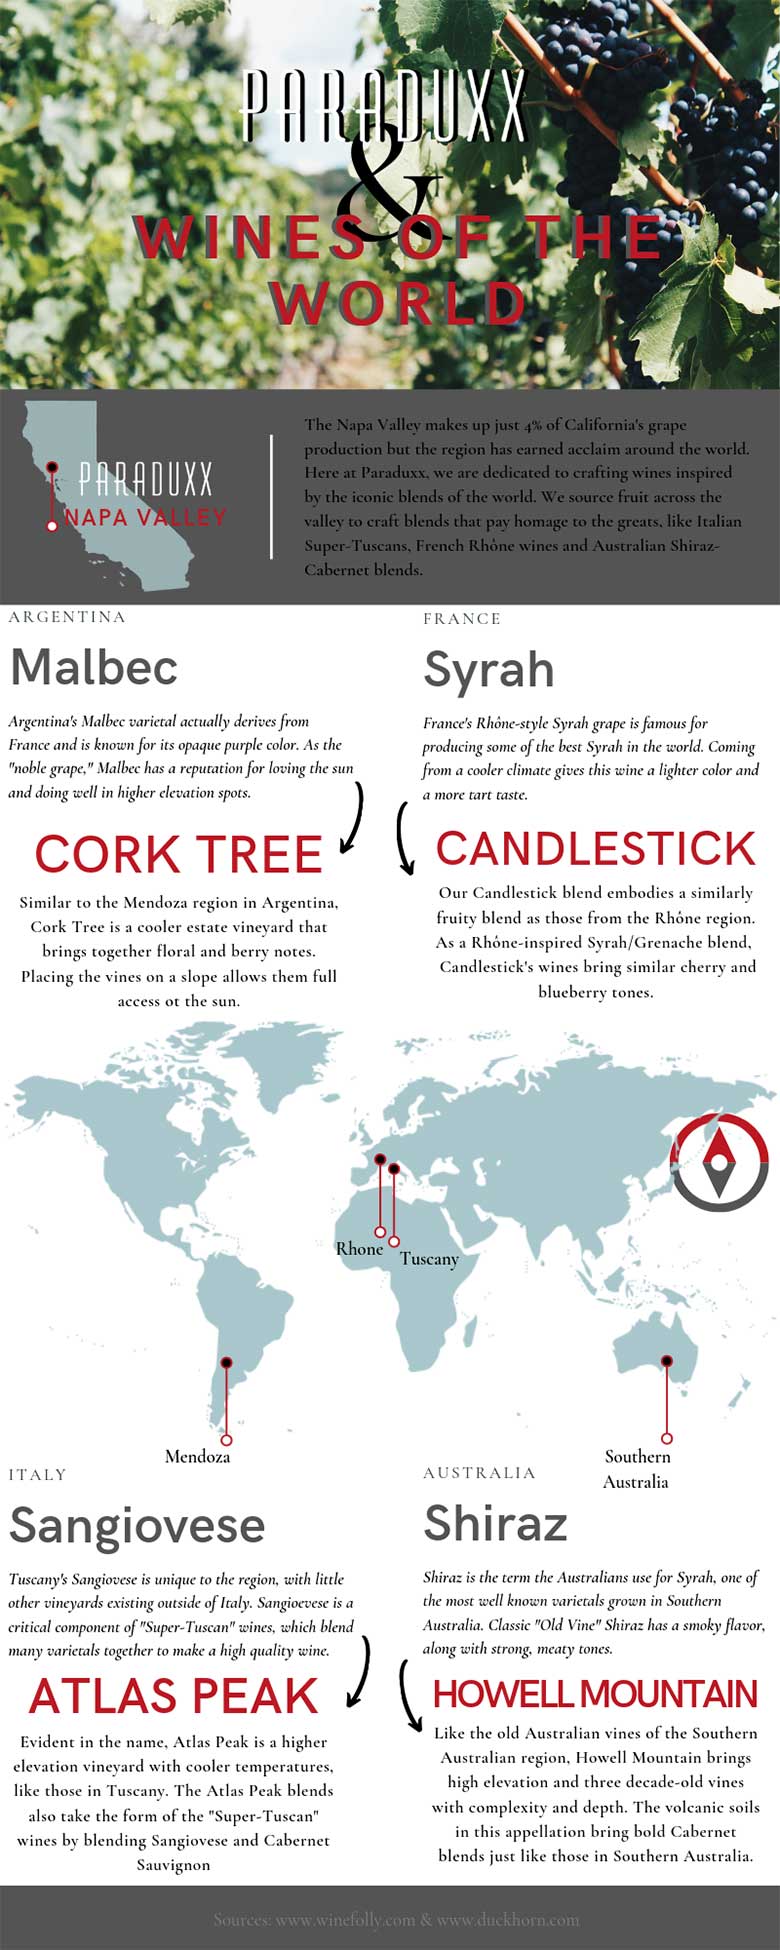 Wines of the World Infographic - sources www.winefolly.com, www.duckhorn.com